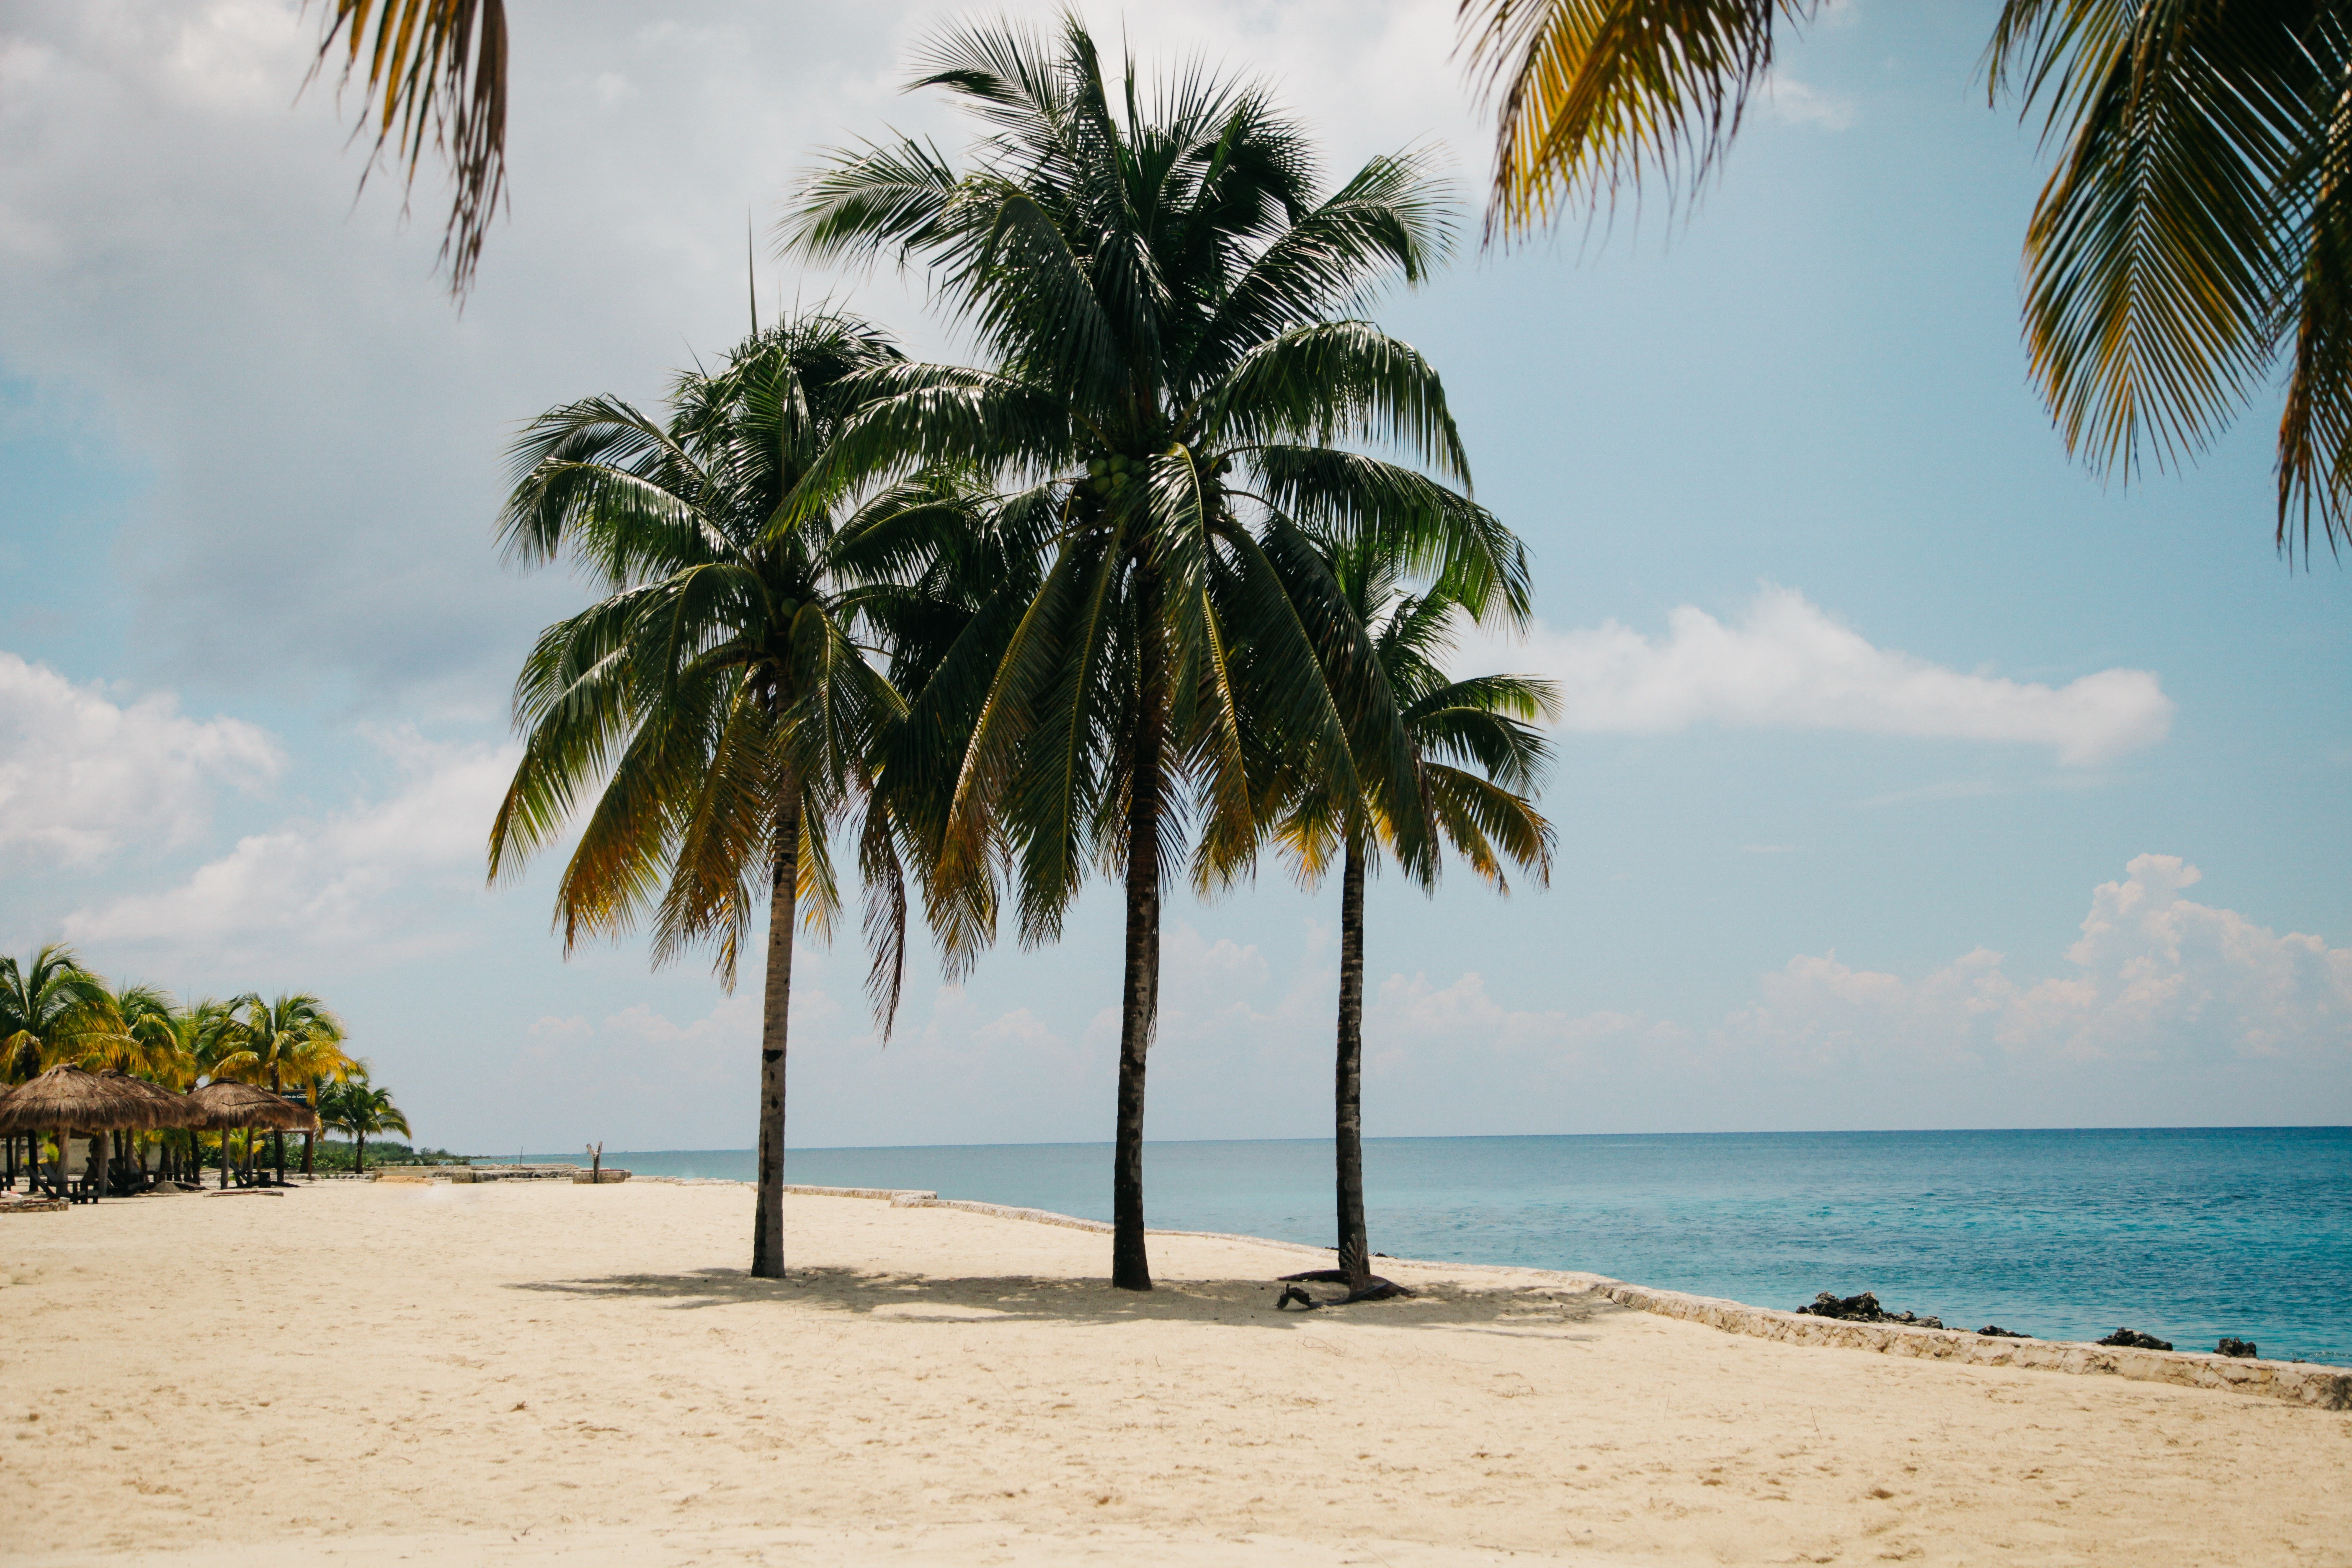 General 5616x3744 nature beach trees water palm trees sand sky